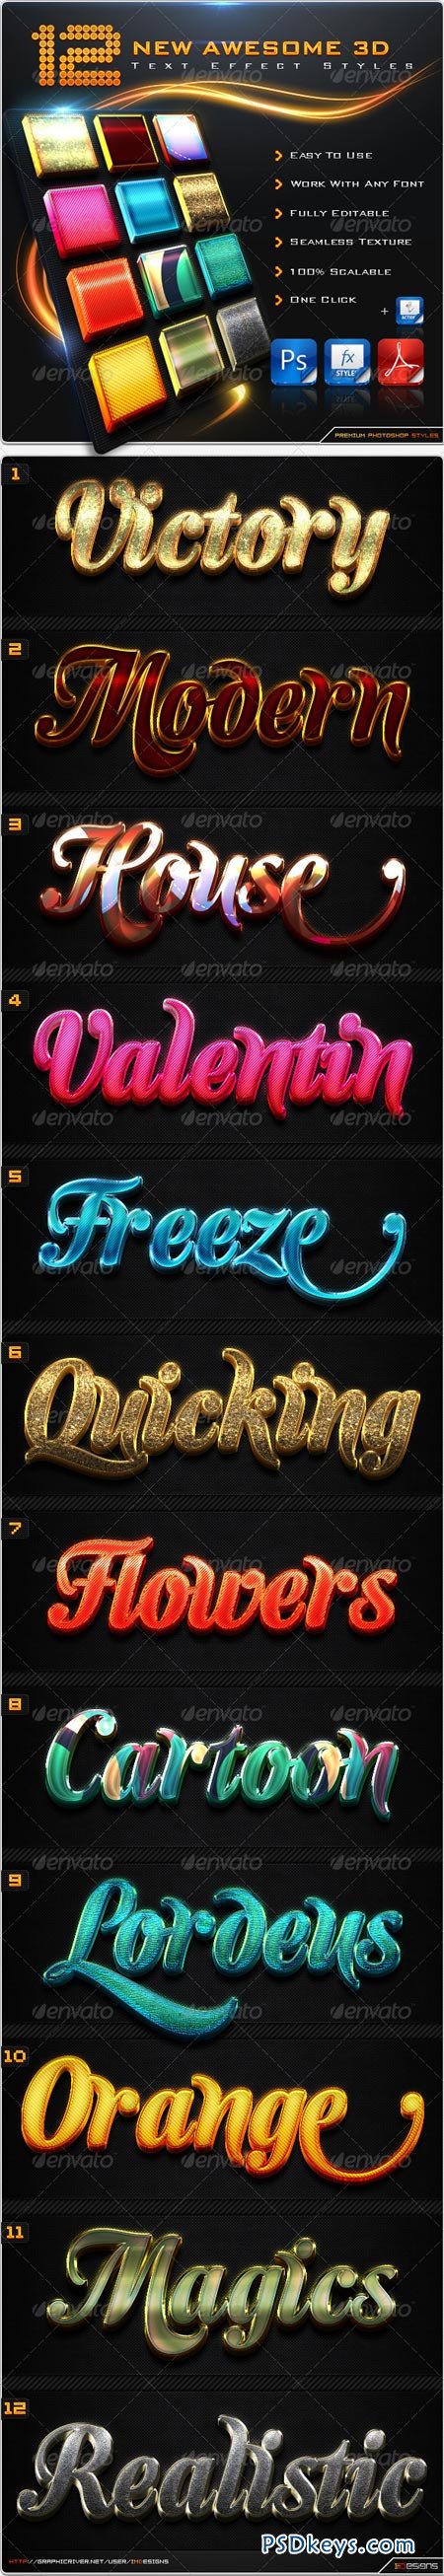 12 New Awesome 3D Text Effect Styles + Actions 8604061